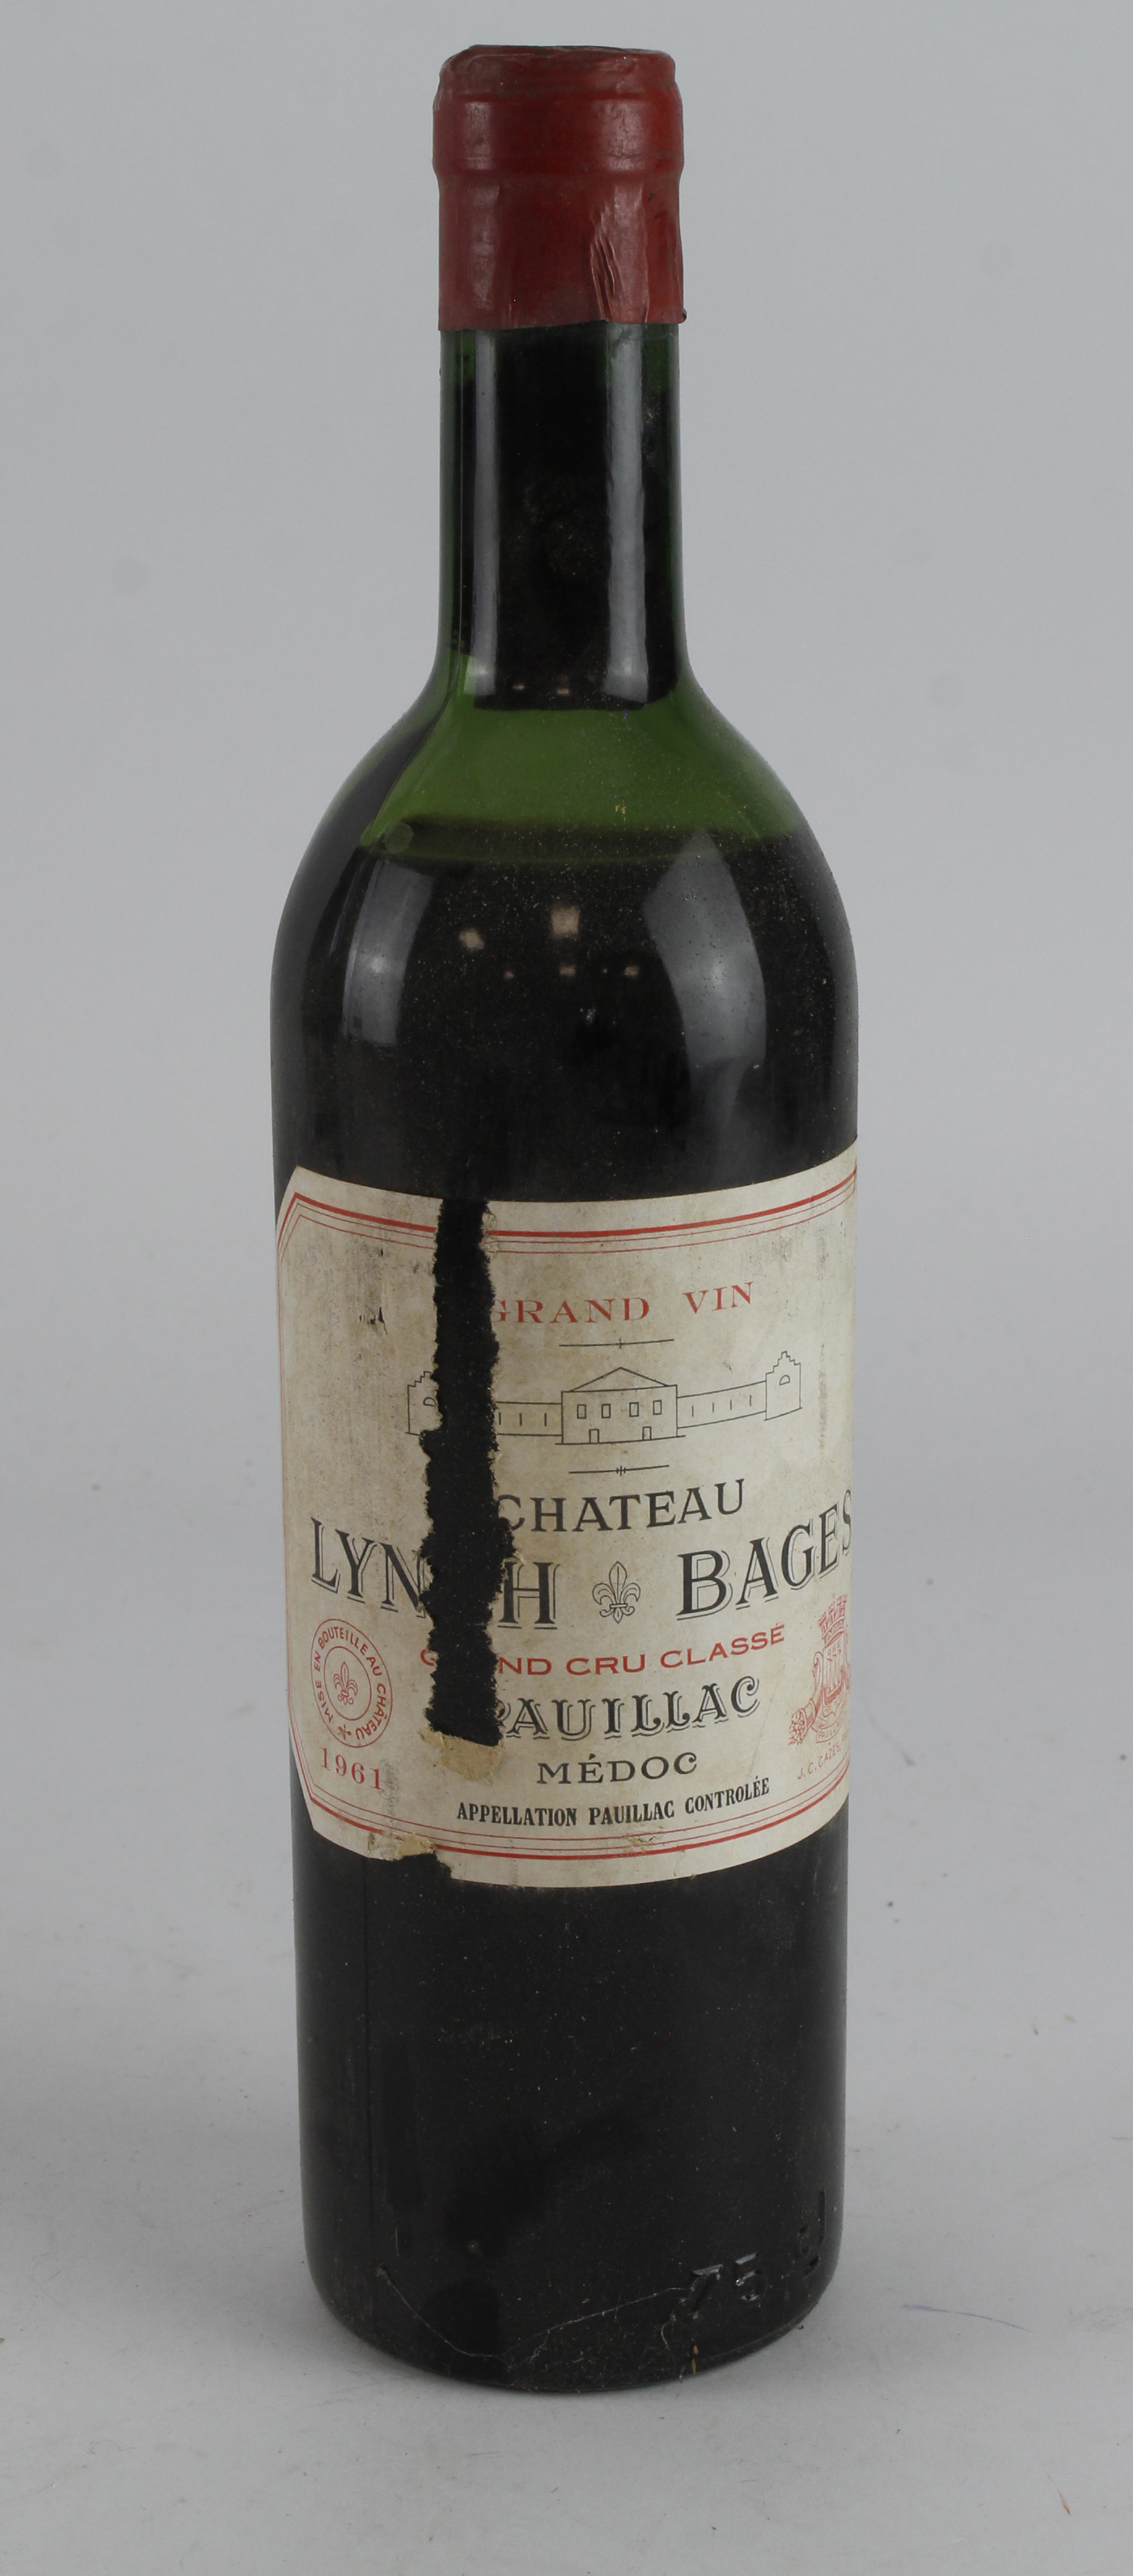 Chateau Lynch. One bottle of Chateau Lynch Bages 1961 Pauillac, buyer collects or arranges own